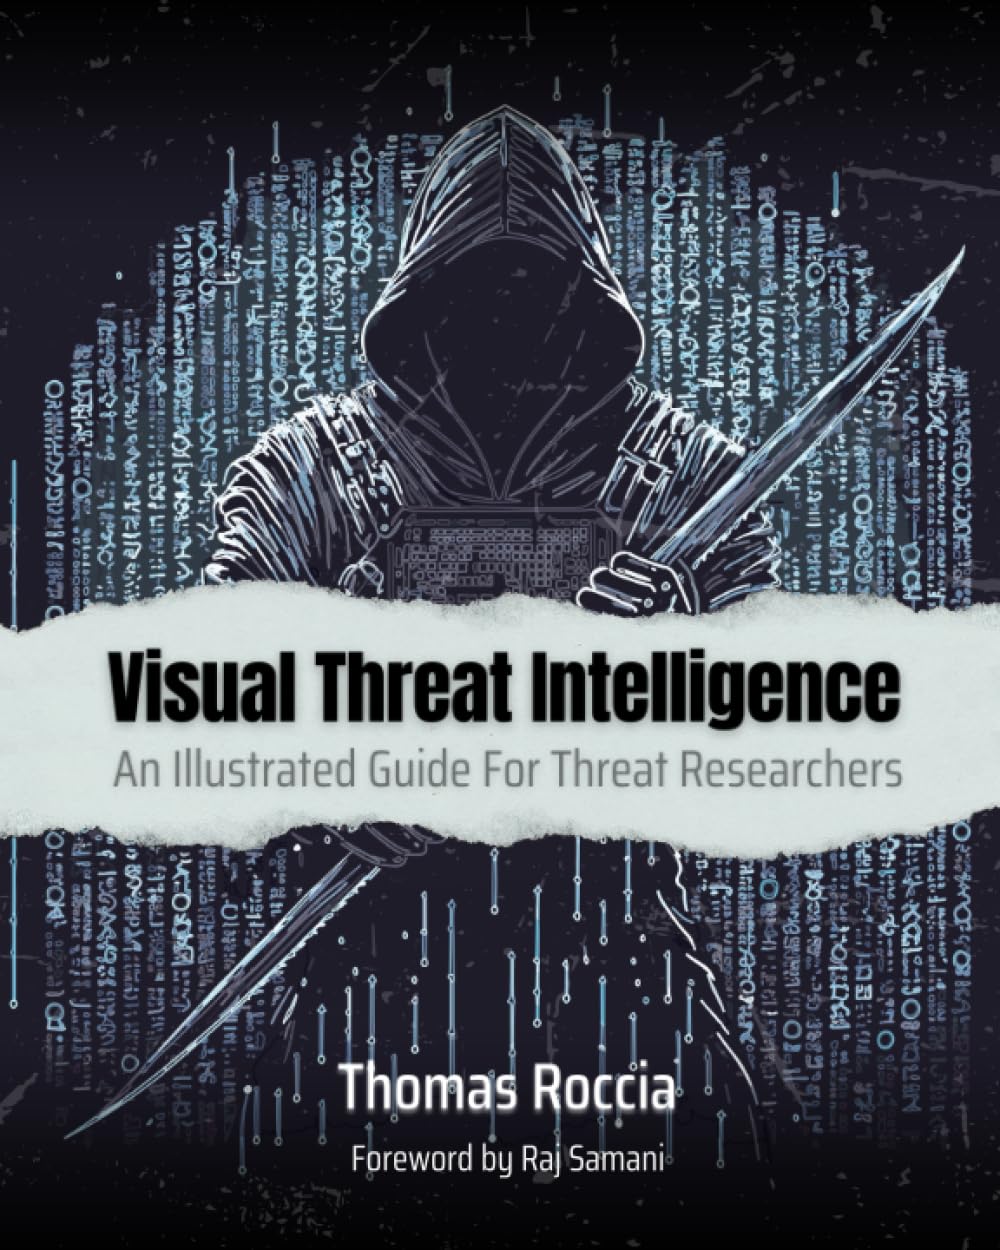 Visual Threat Intelligence: An Illustrated Guide For Threat Researchers